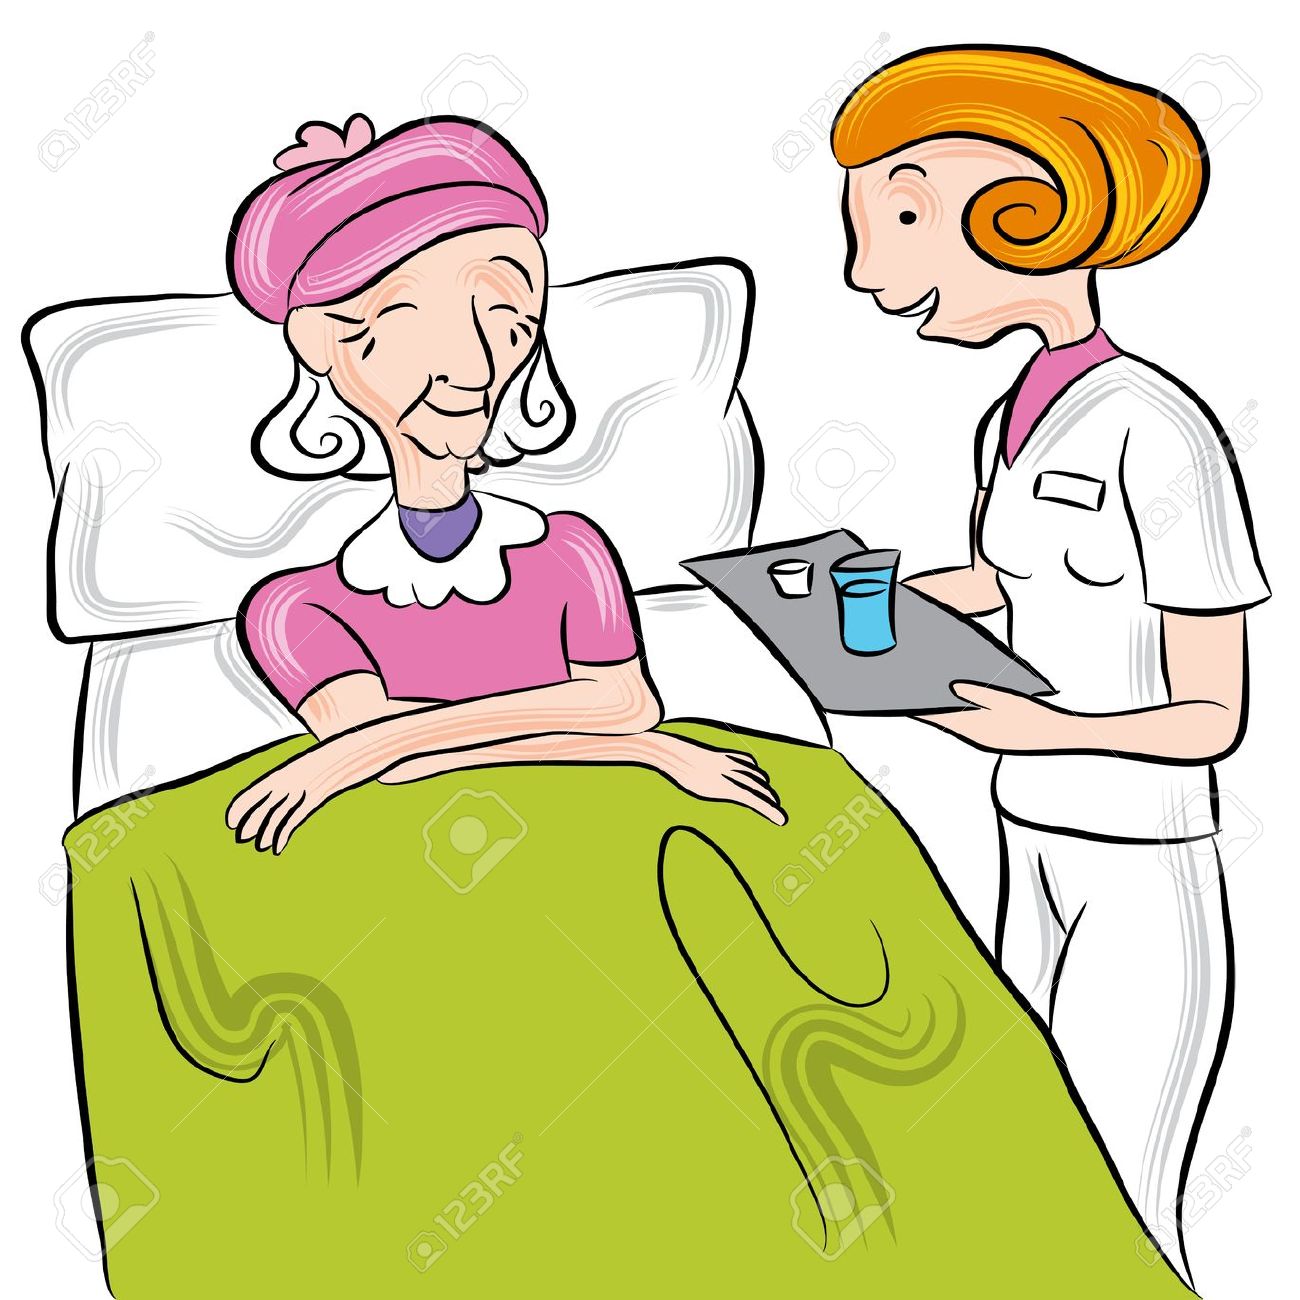 caring clipart retirement home